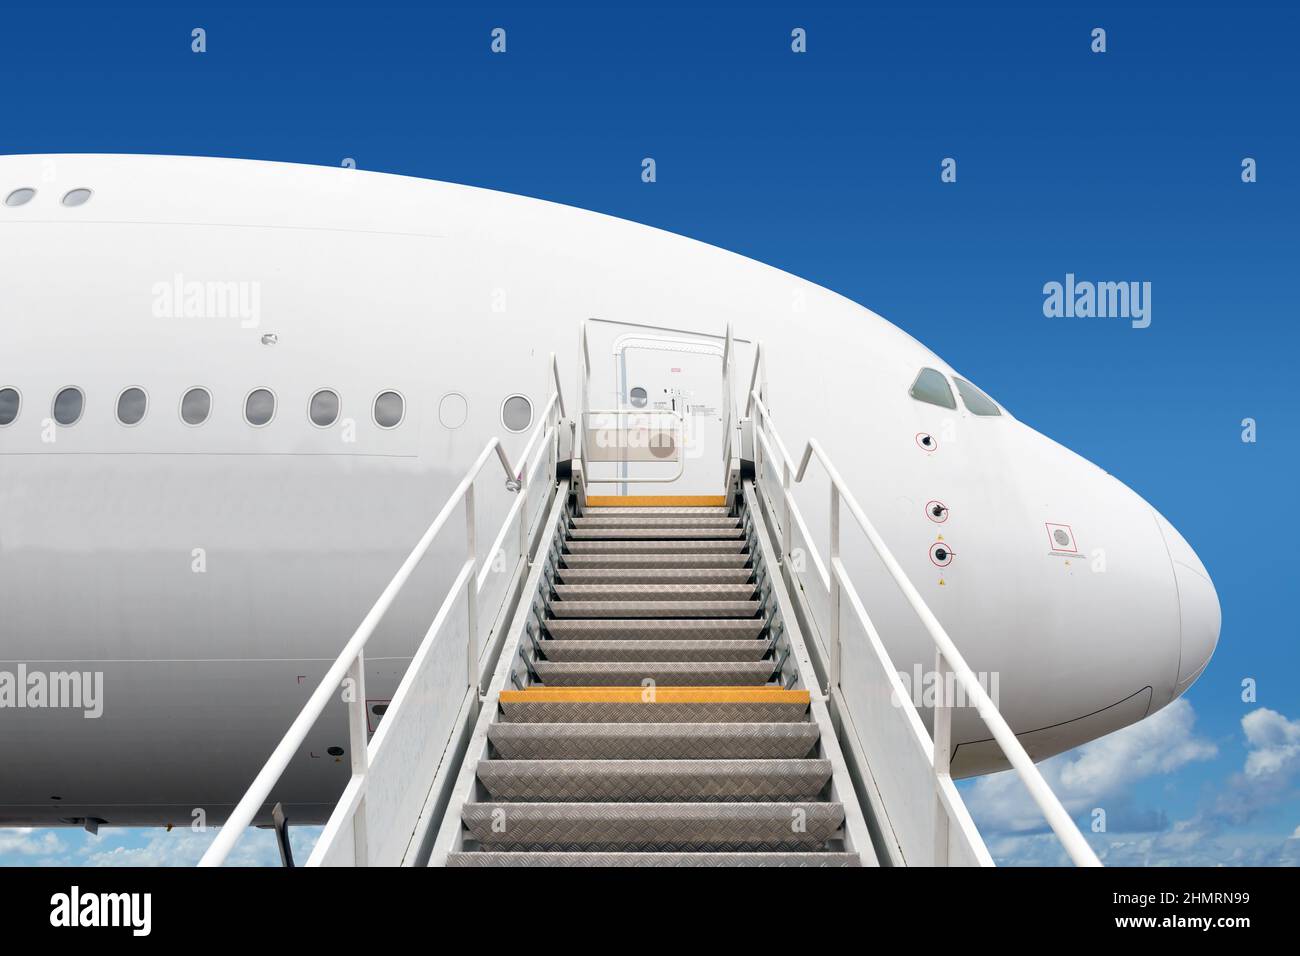 passenger boarding stairs leading to big jet plane entrance Stock Photo